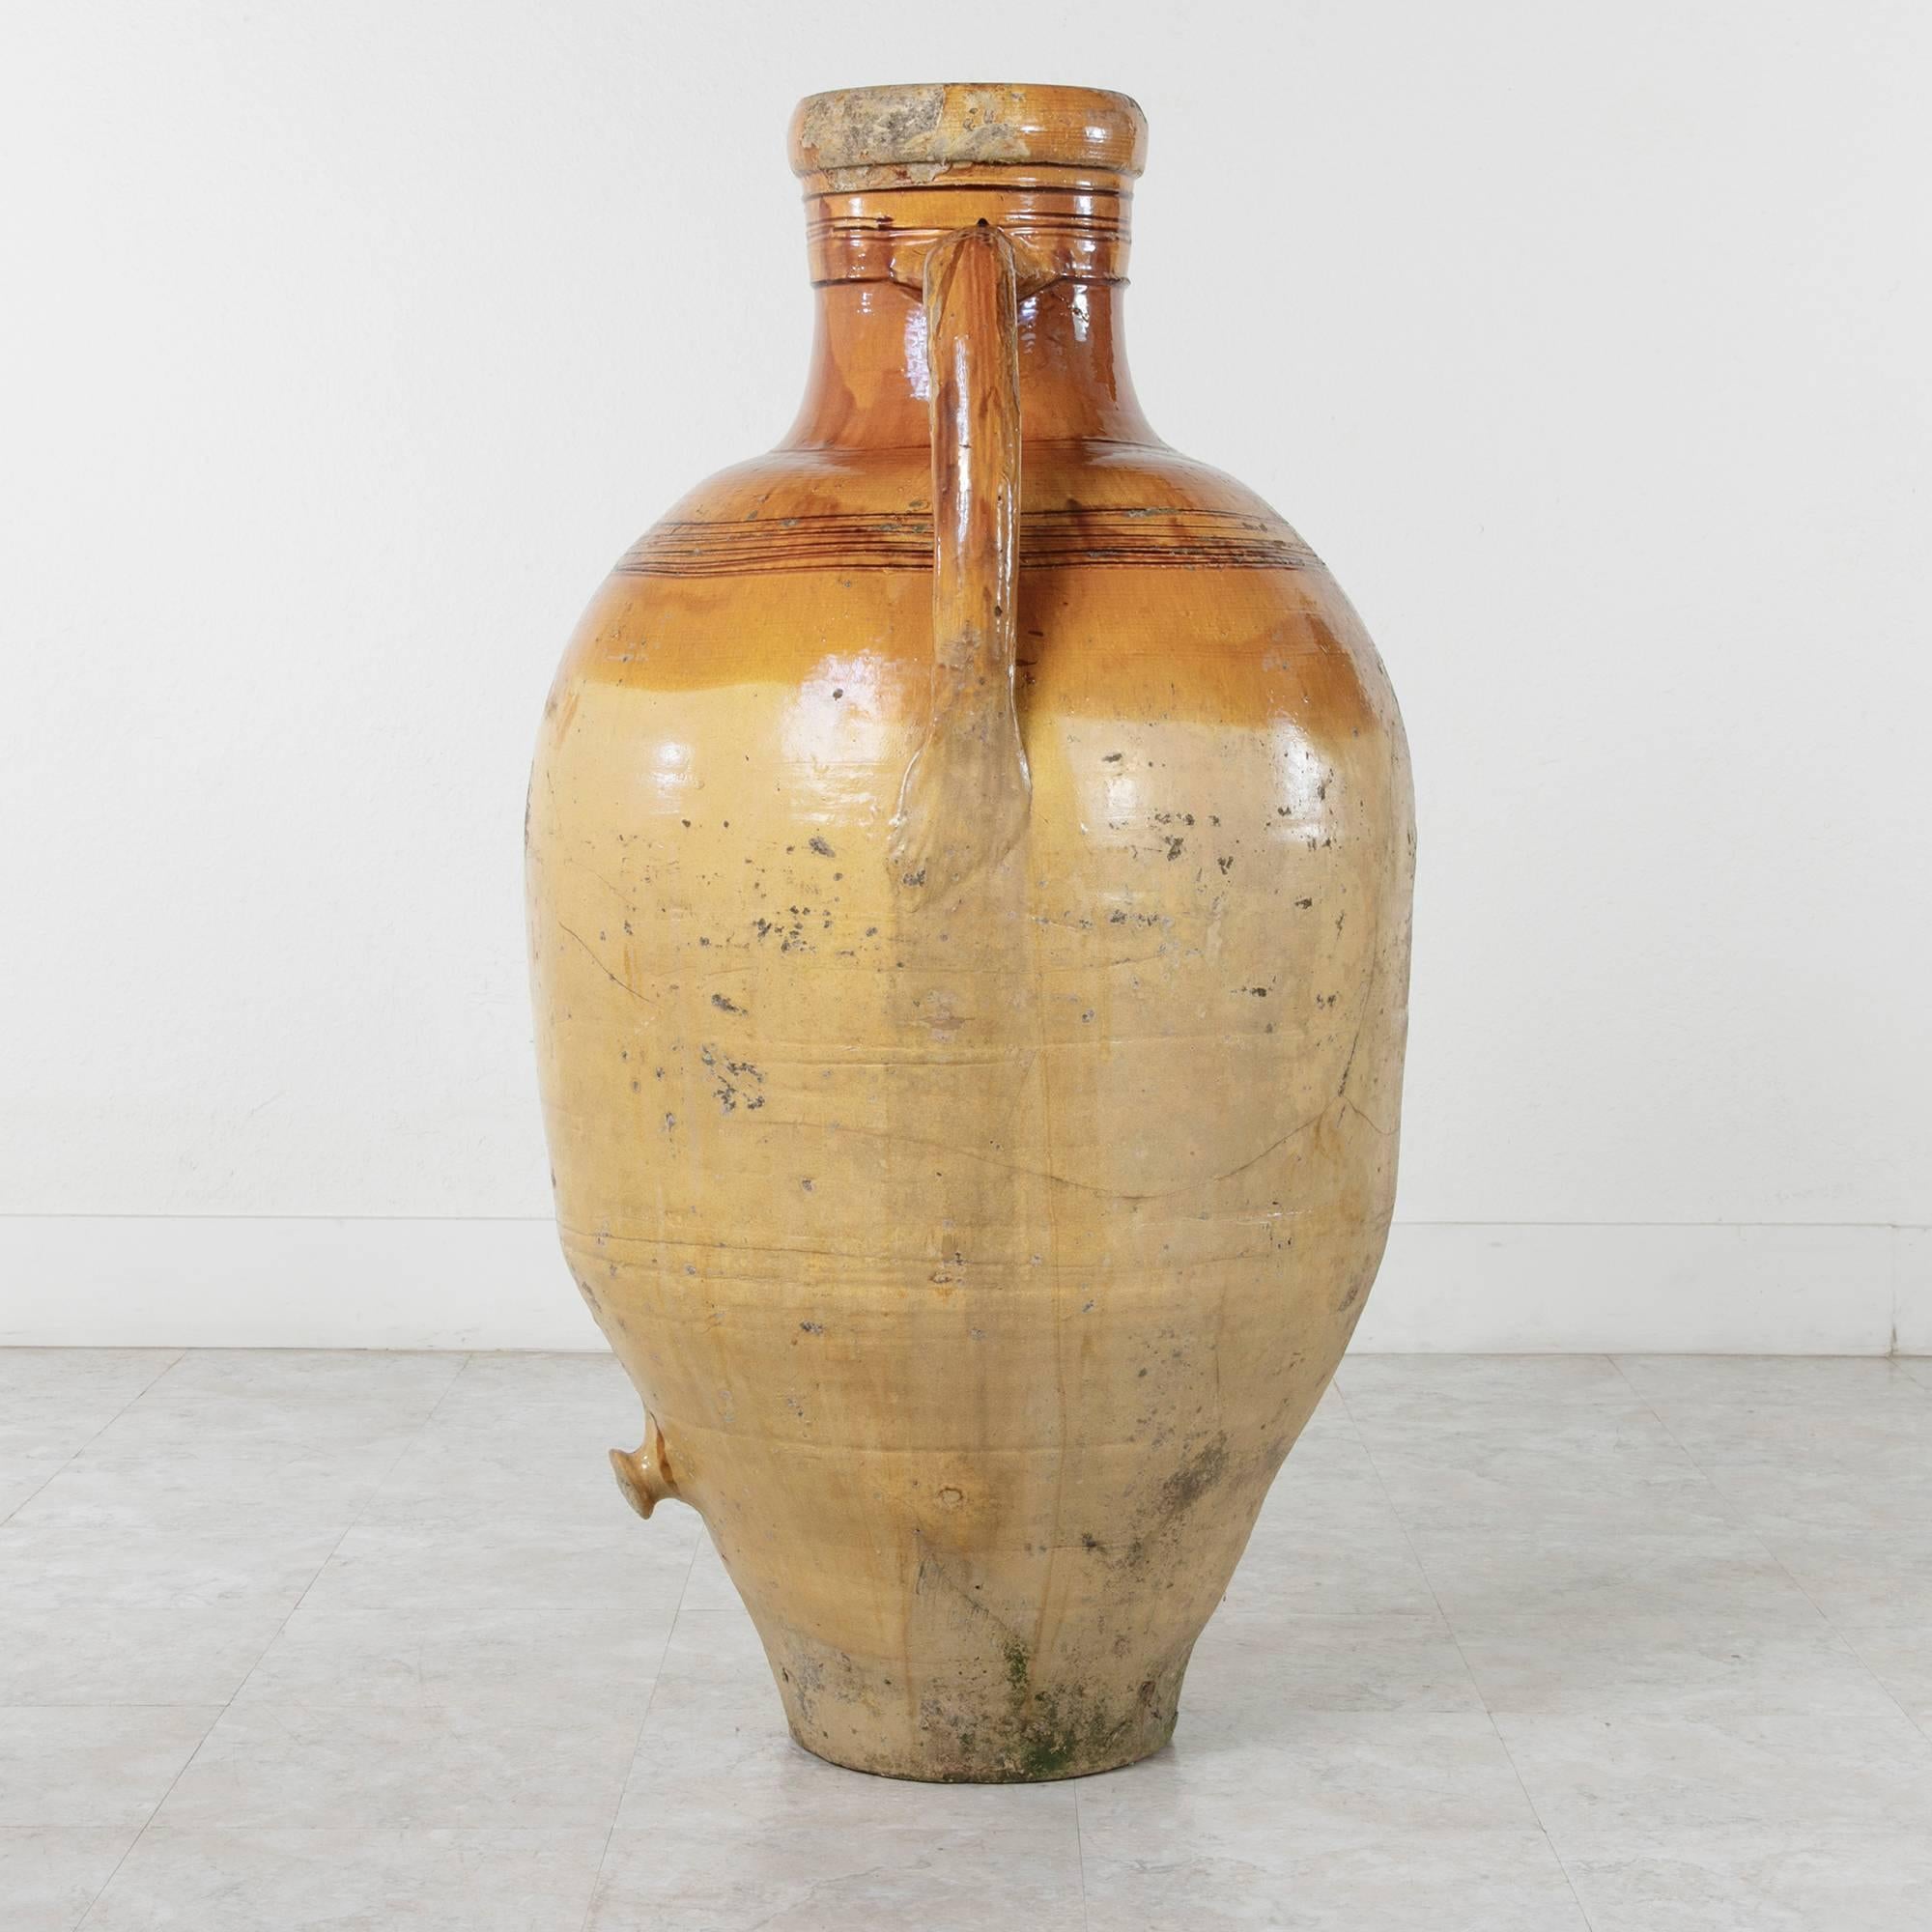 This circa 1900 large yellow faience olive oil jar hails from Naples, Italy. The double handles and lower spout of this Amphora reveal a beautiful patina from the handling of the olive oil once stored inside. A wonderful Mediterranean addition to